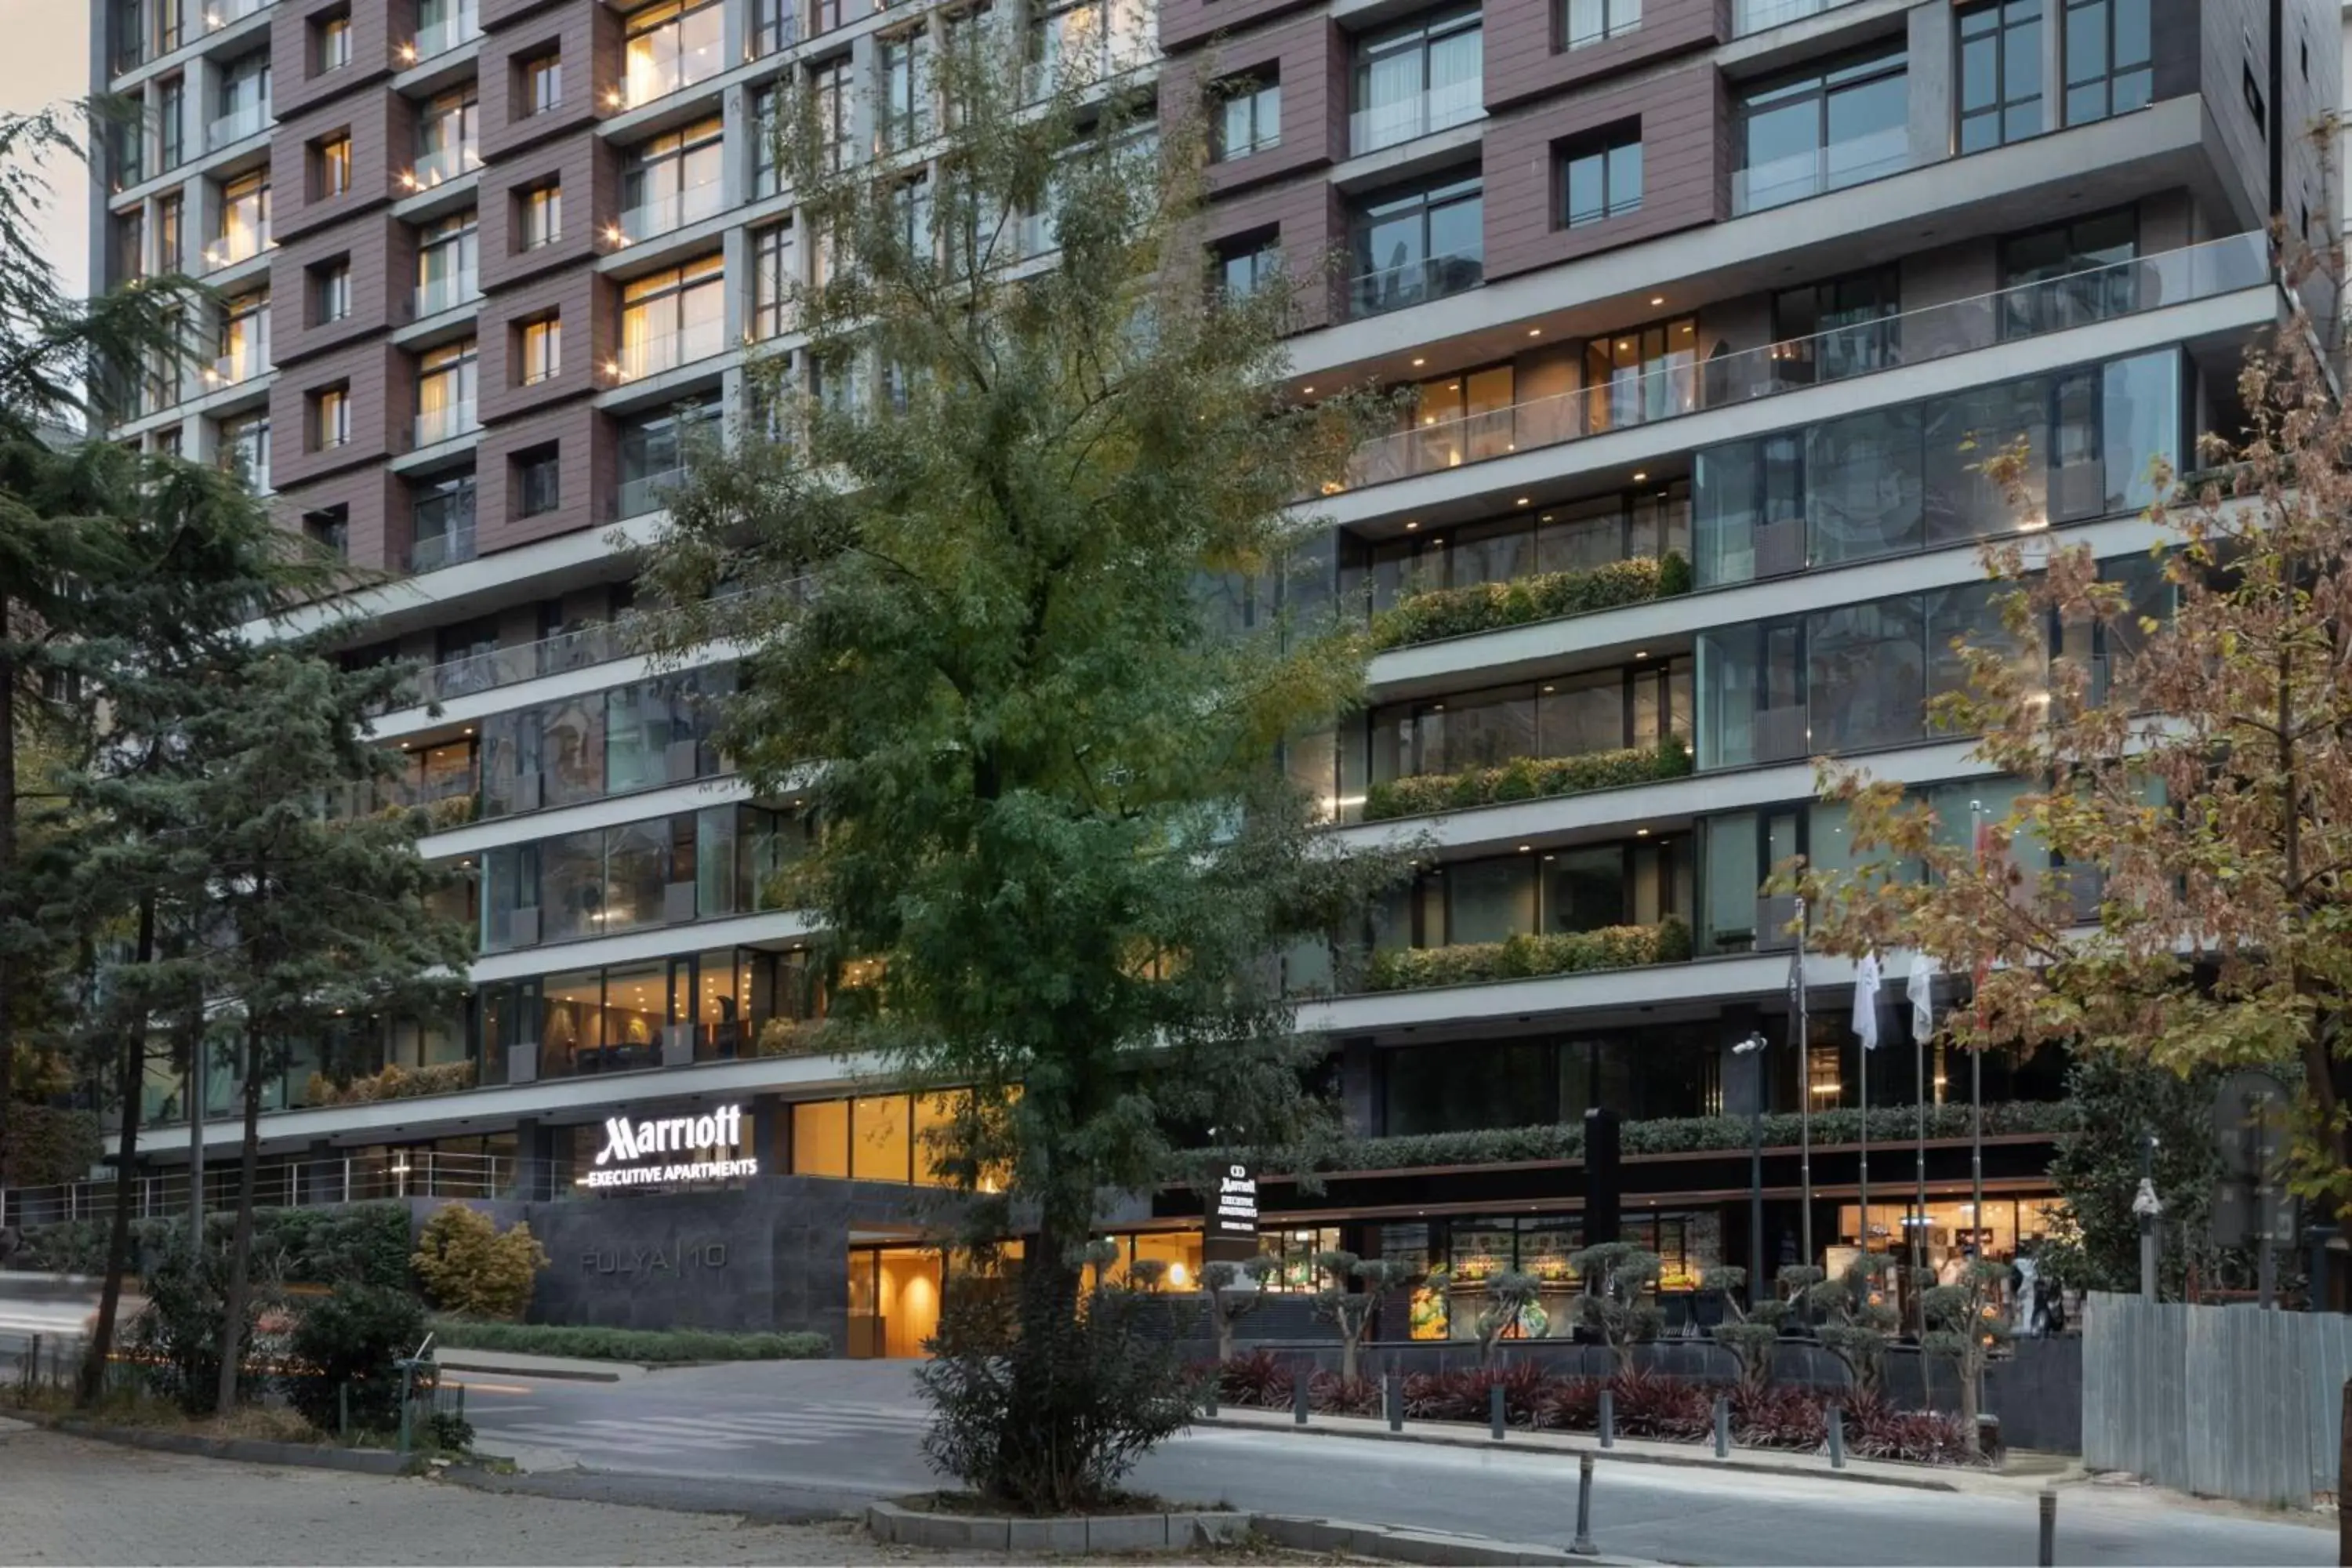 Property Building in Marriott Executive Apartments Istanbul Fulya